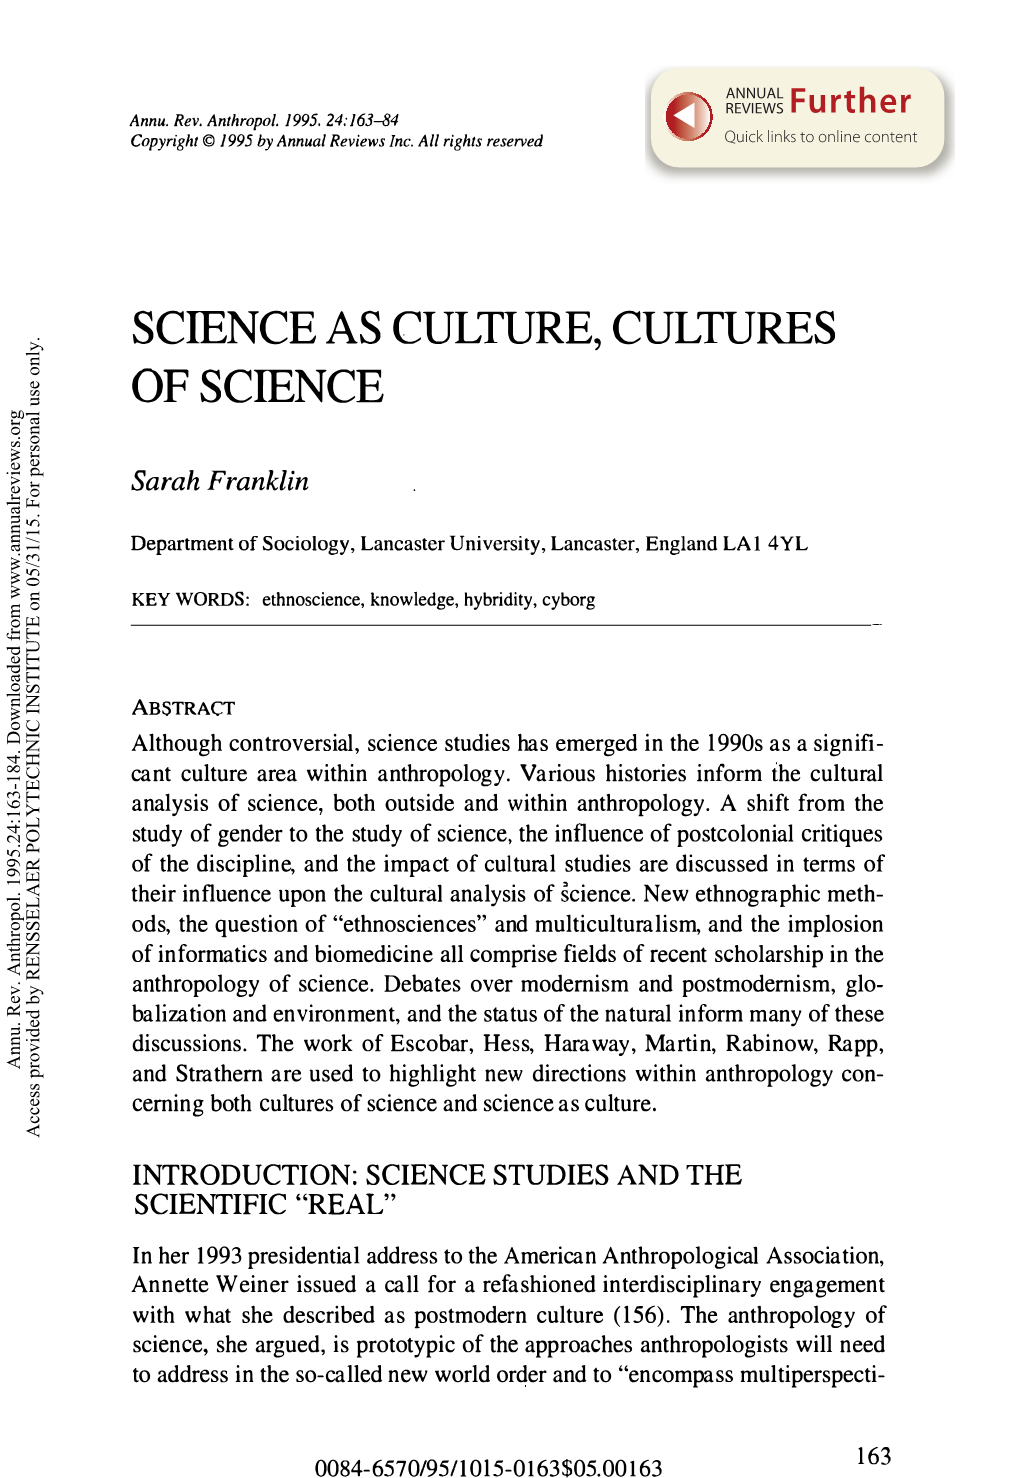 Science As Culture, Cultures of Science